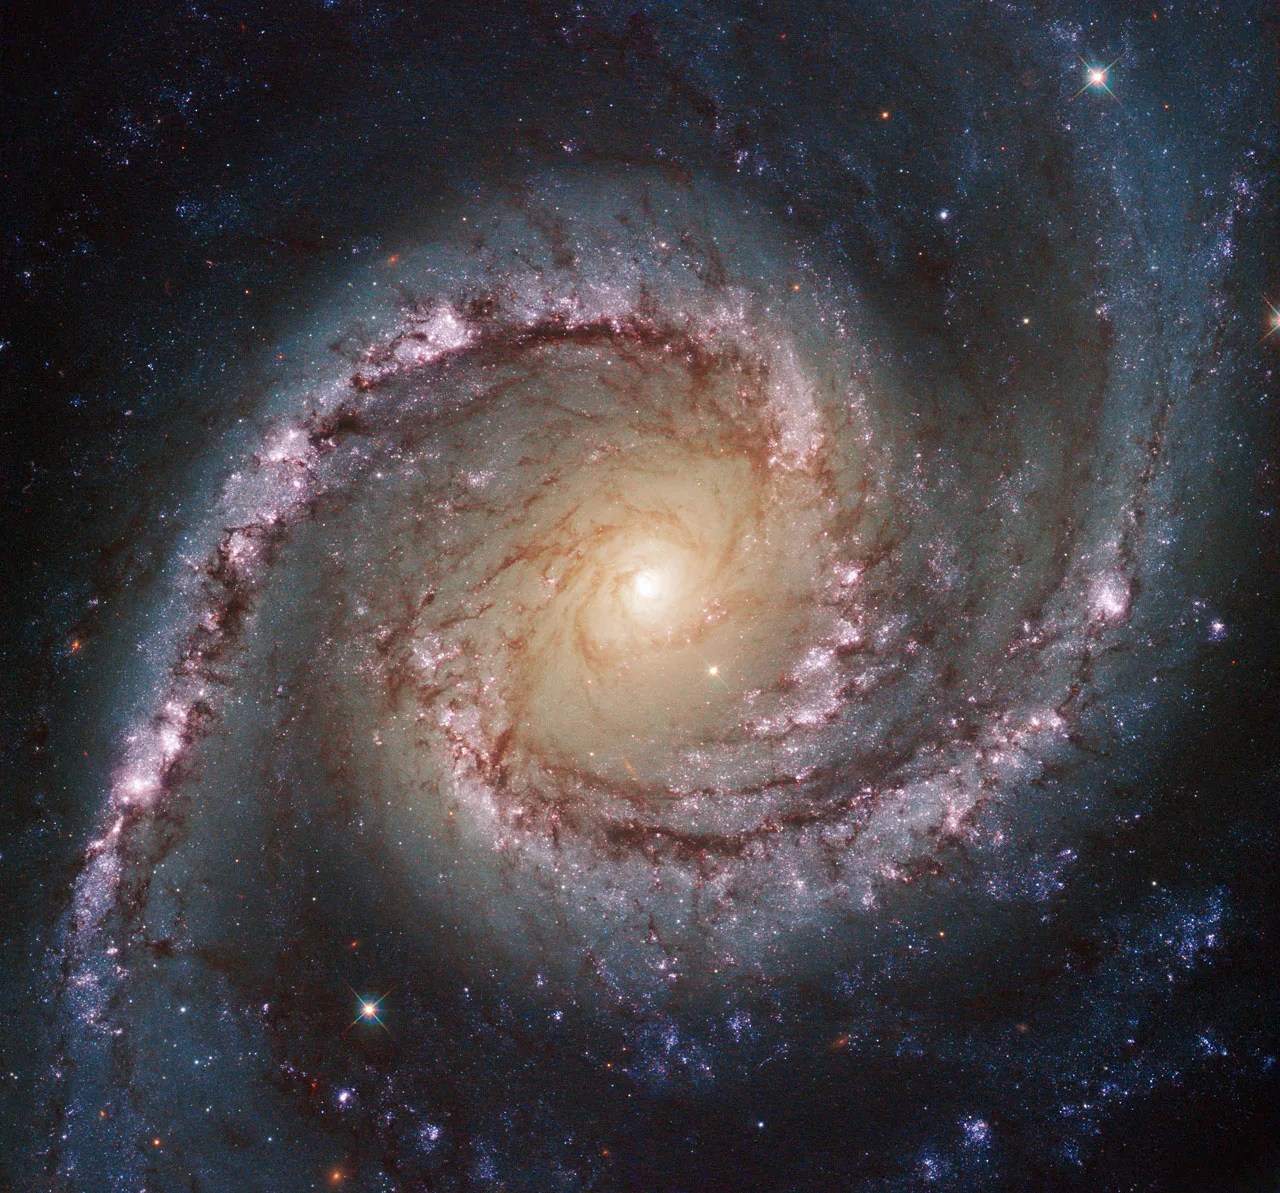 A bright spiral galaxy with two pronounced arms of bright pink stars